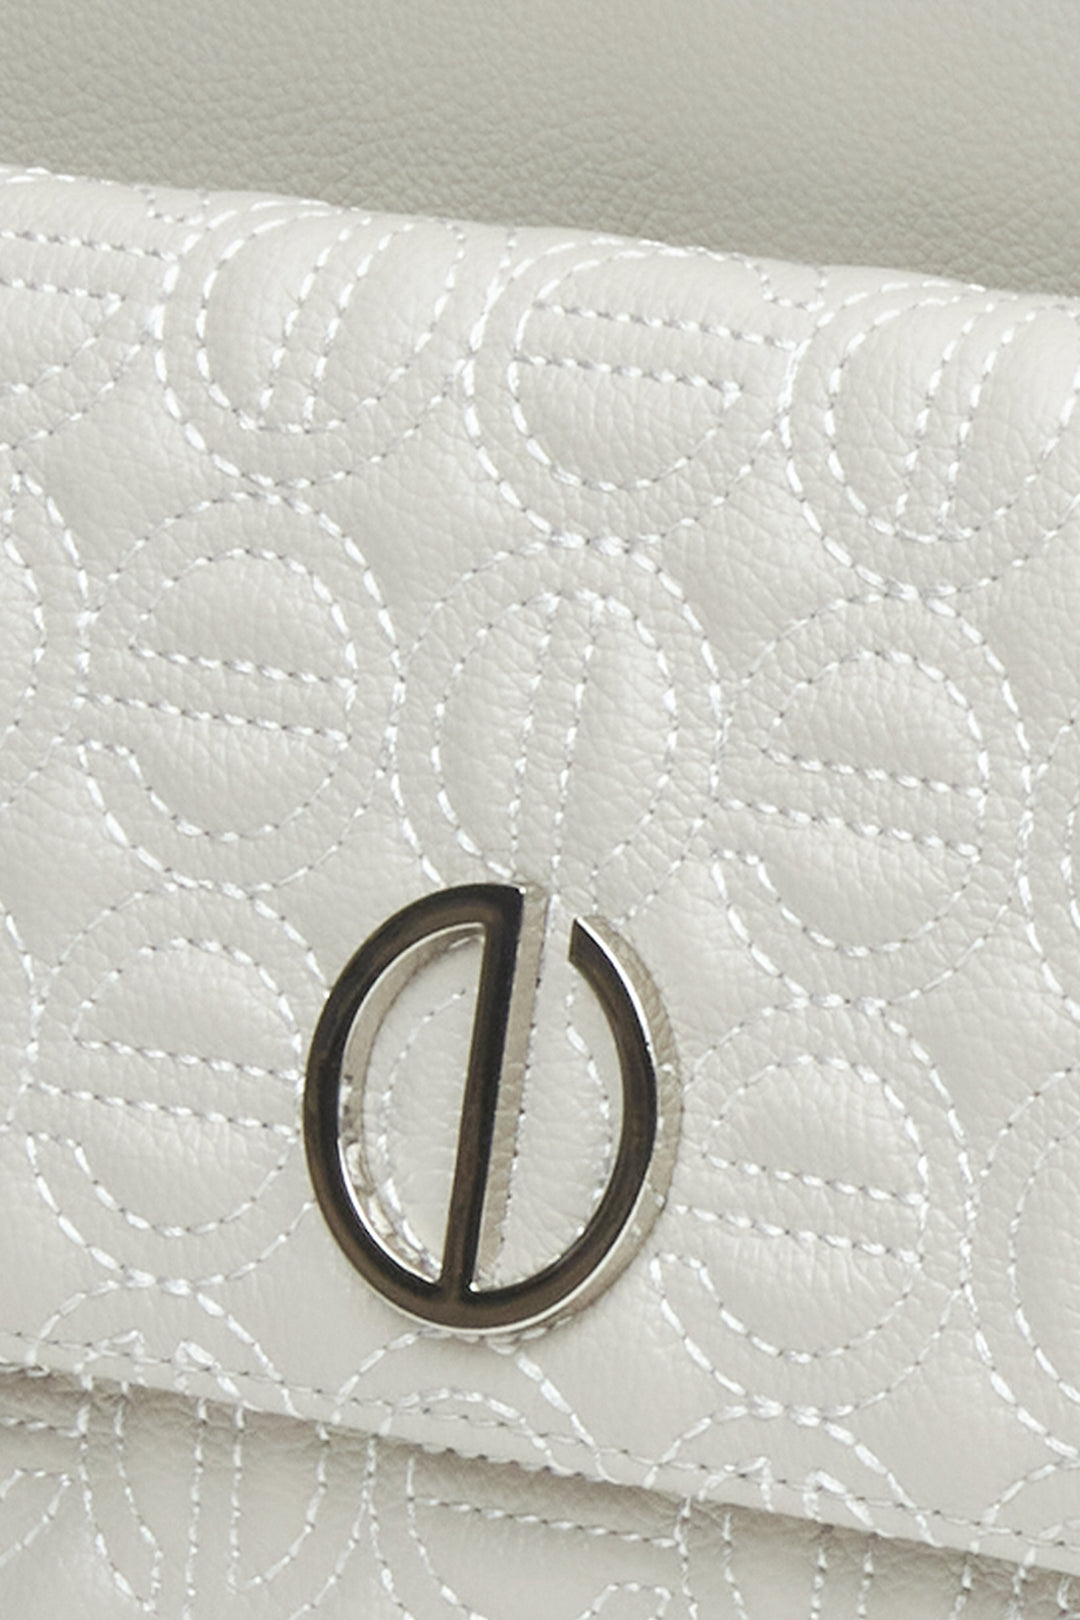 Light grey Estro women's backpack with silver hardware - close-up on details.